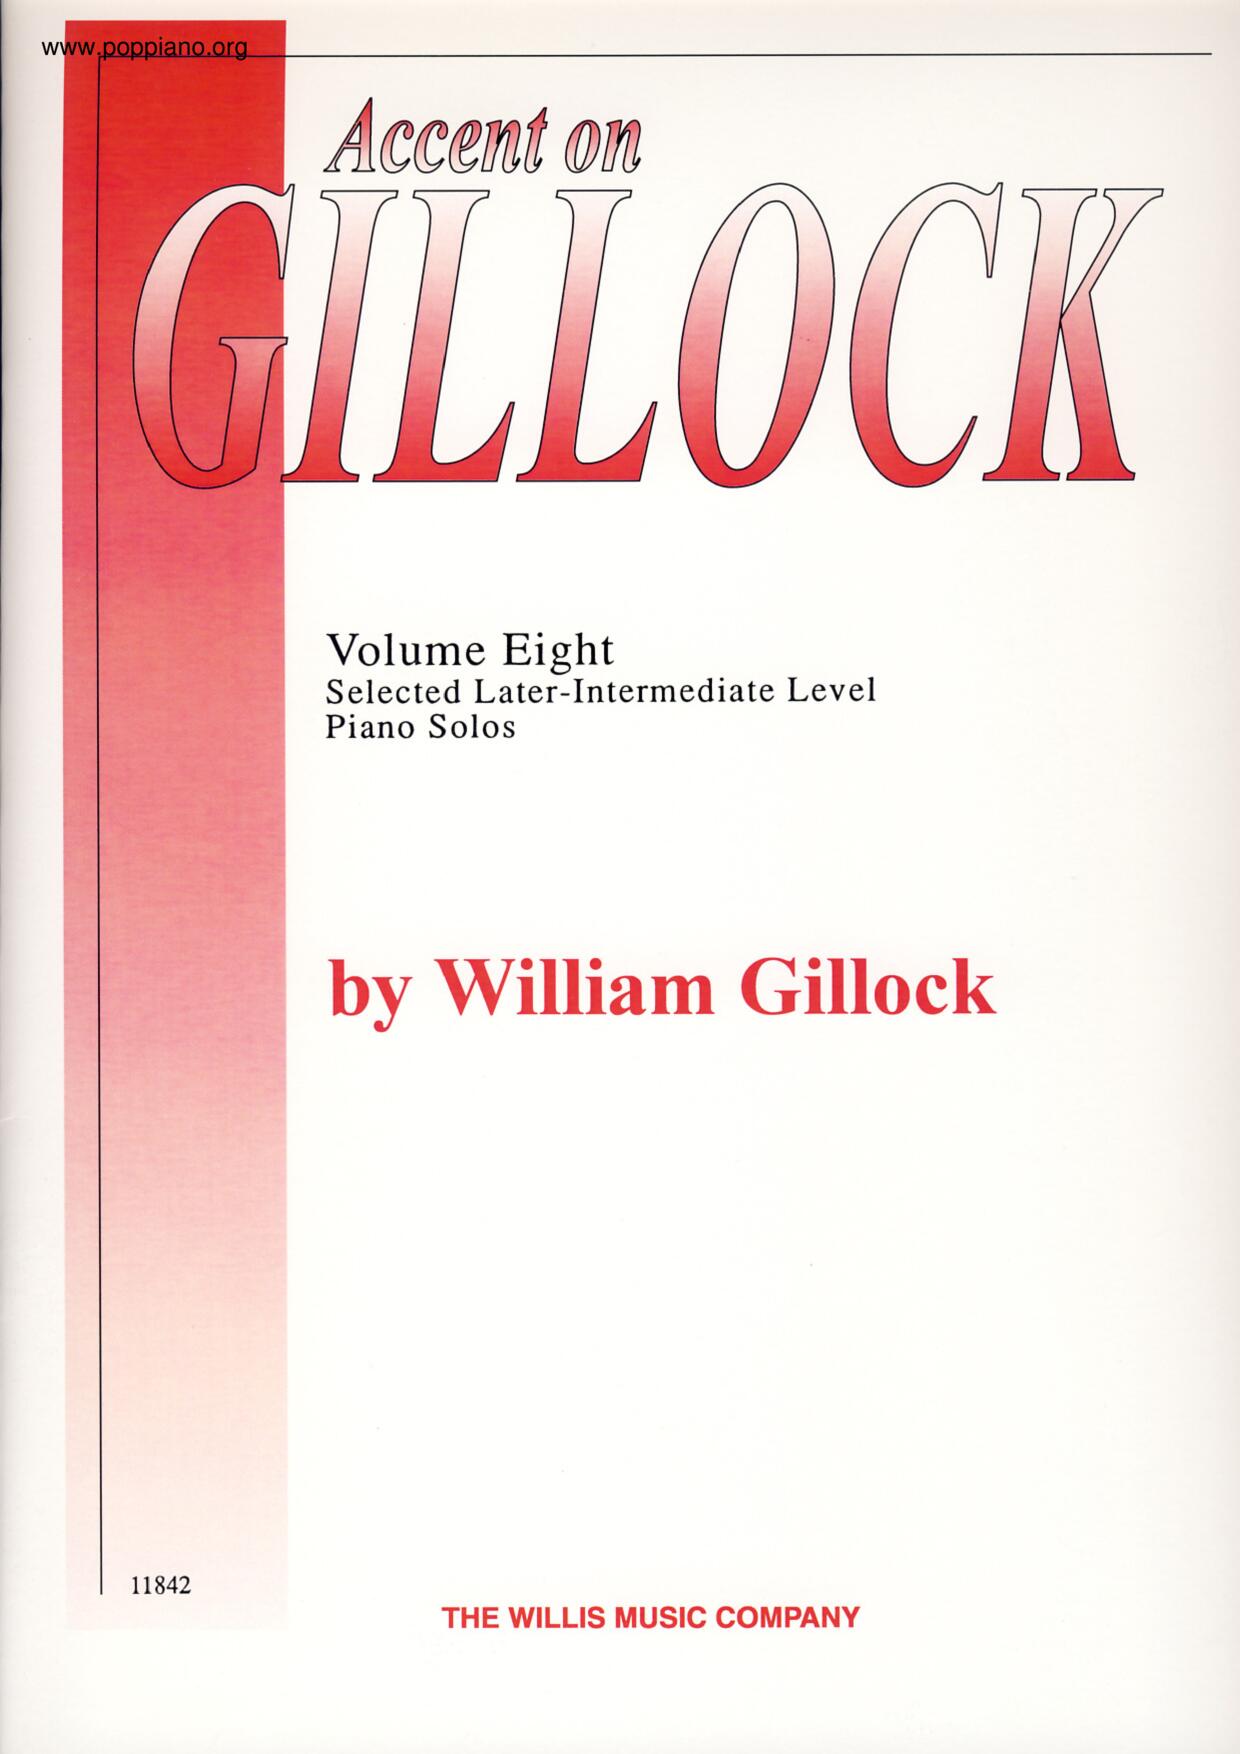 Accent On Gillock Volume 8 - 18 pages琴谱